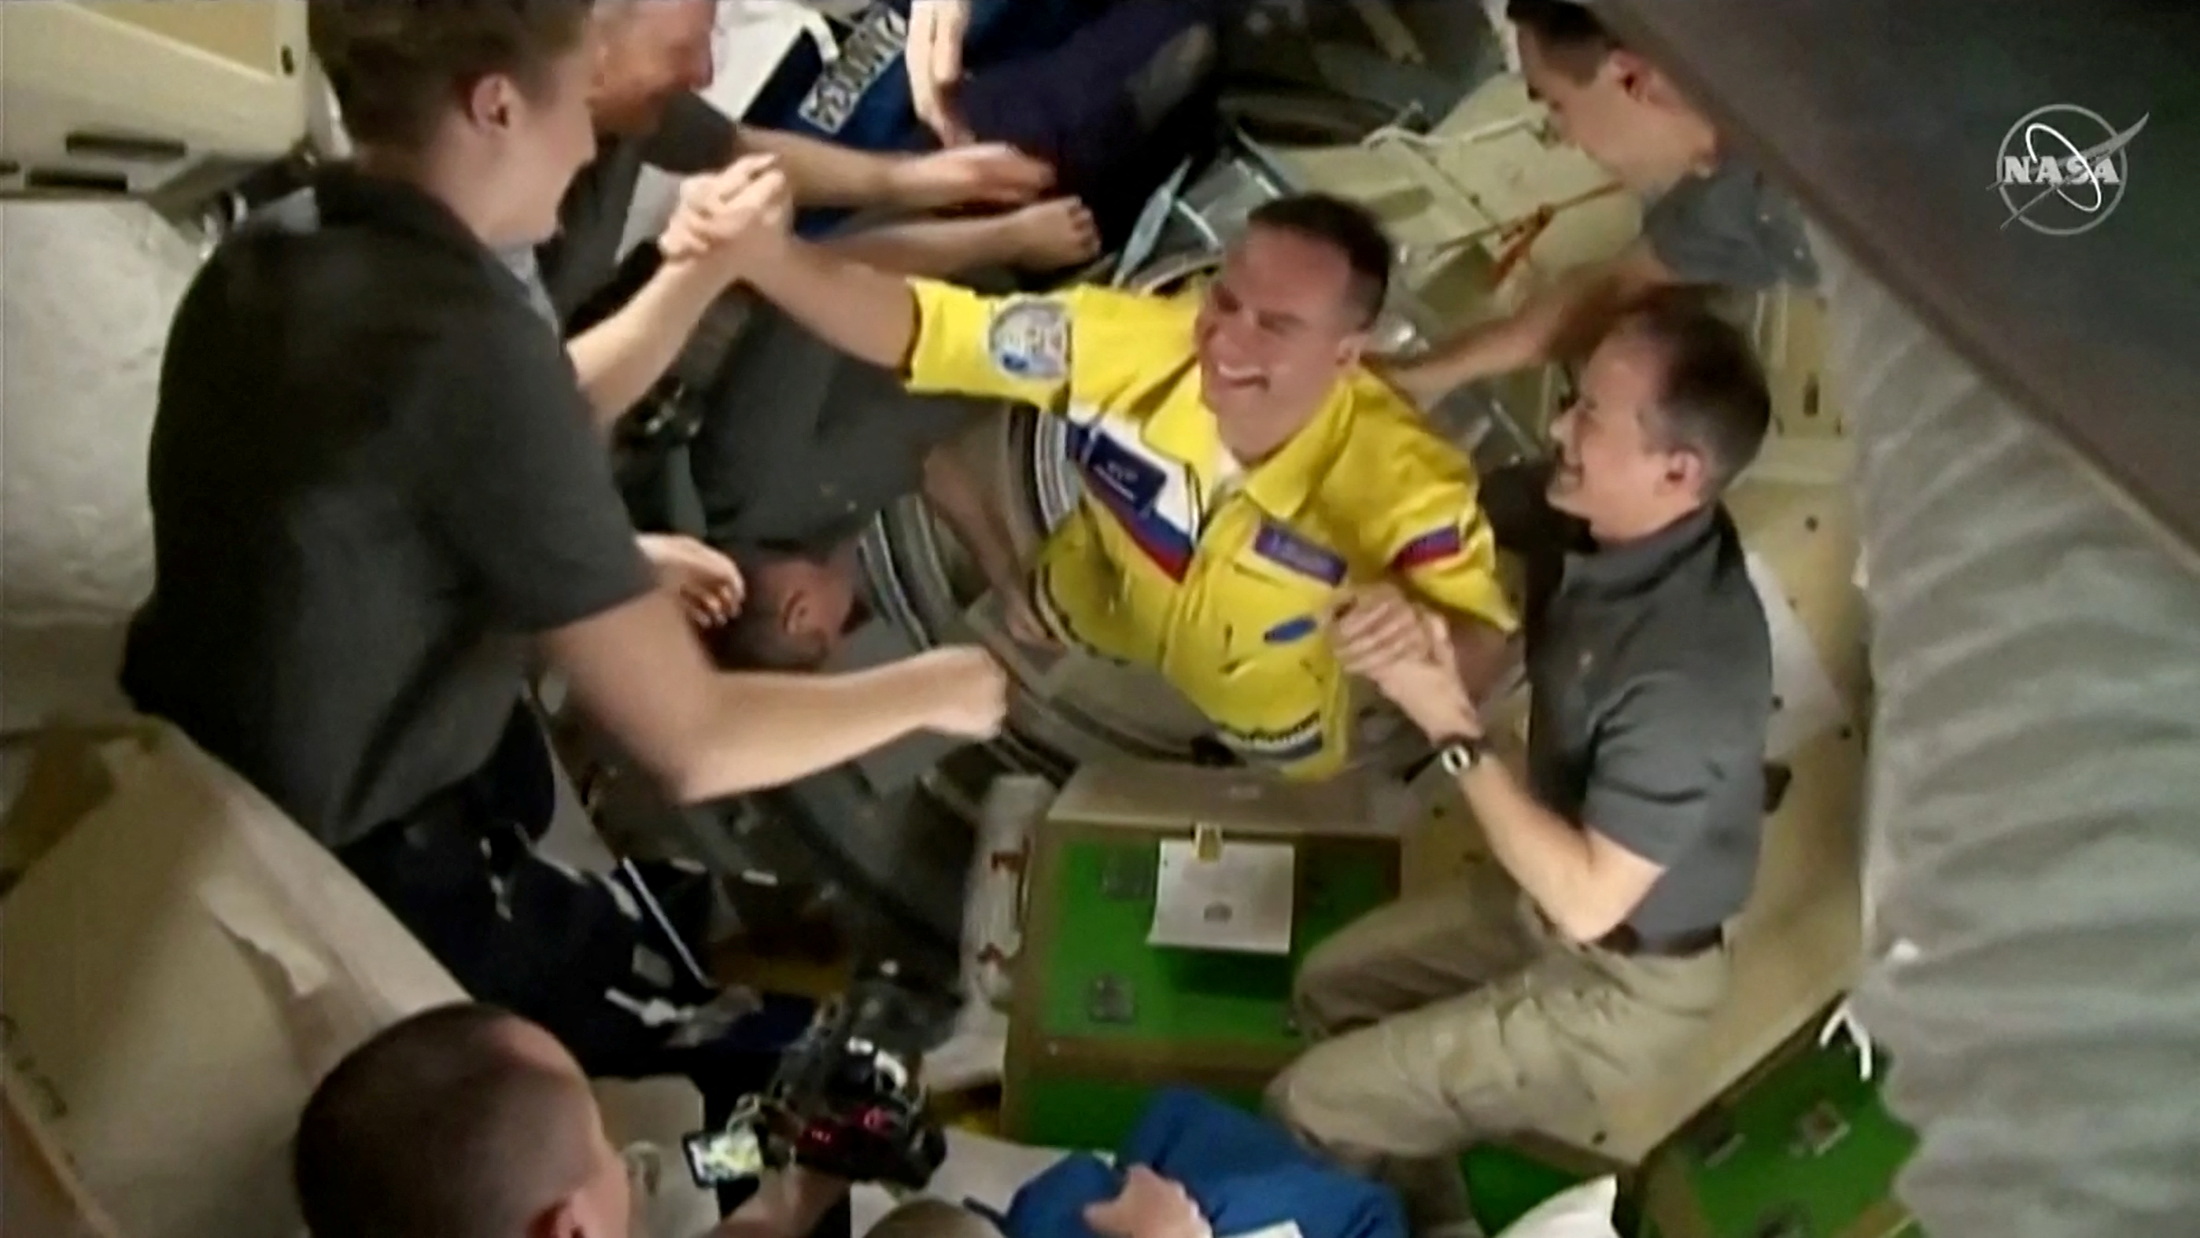 Russian cosmonauts arrive wearing yellow and blue flight suits at the International Space Station